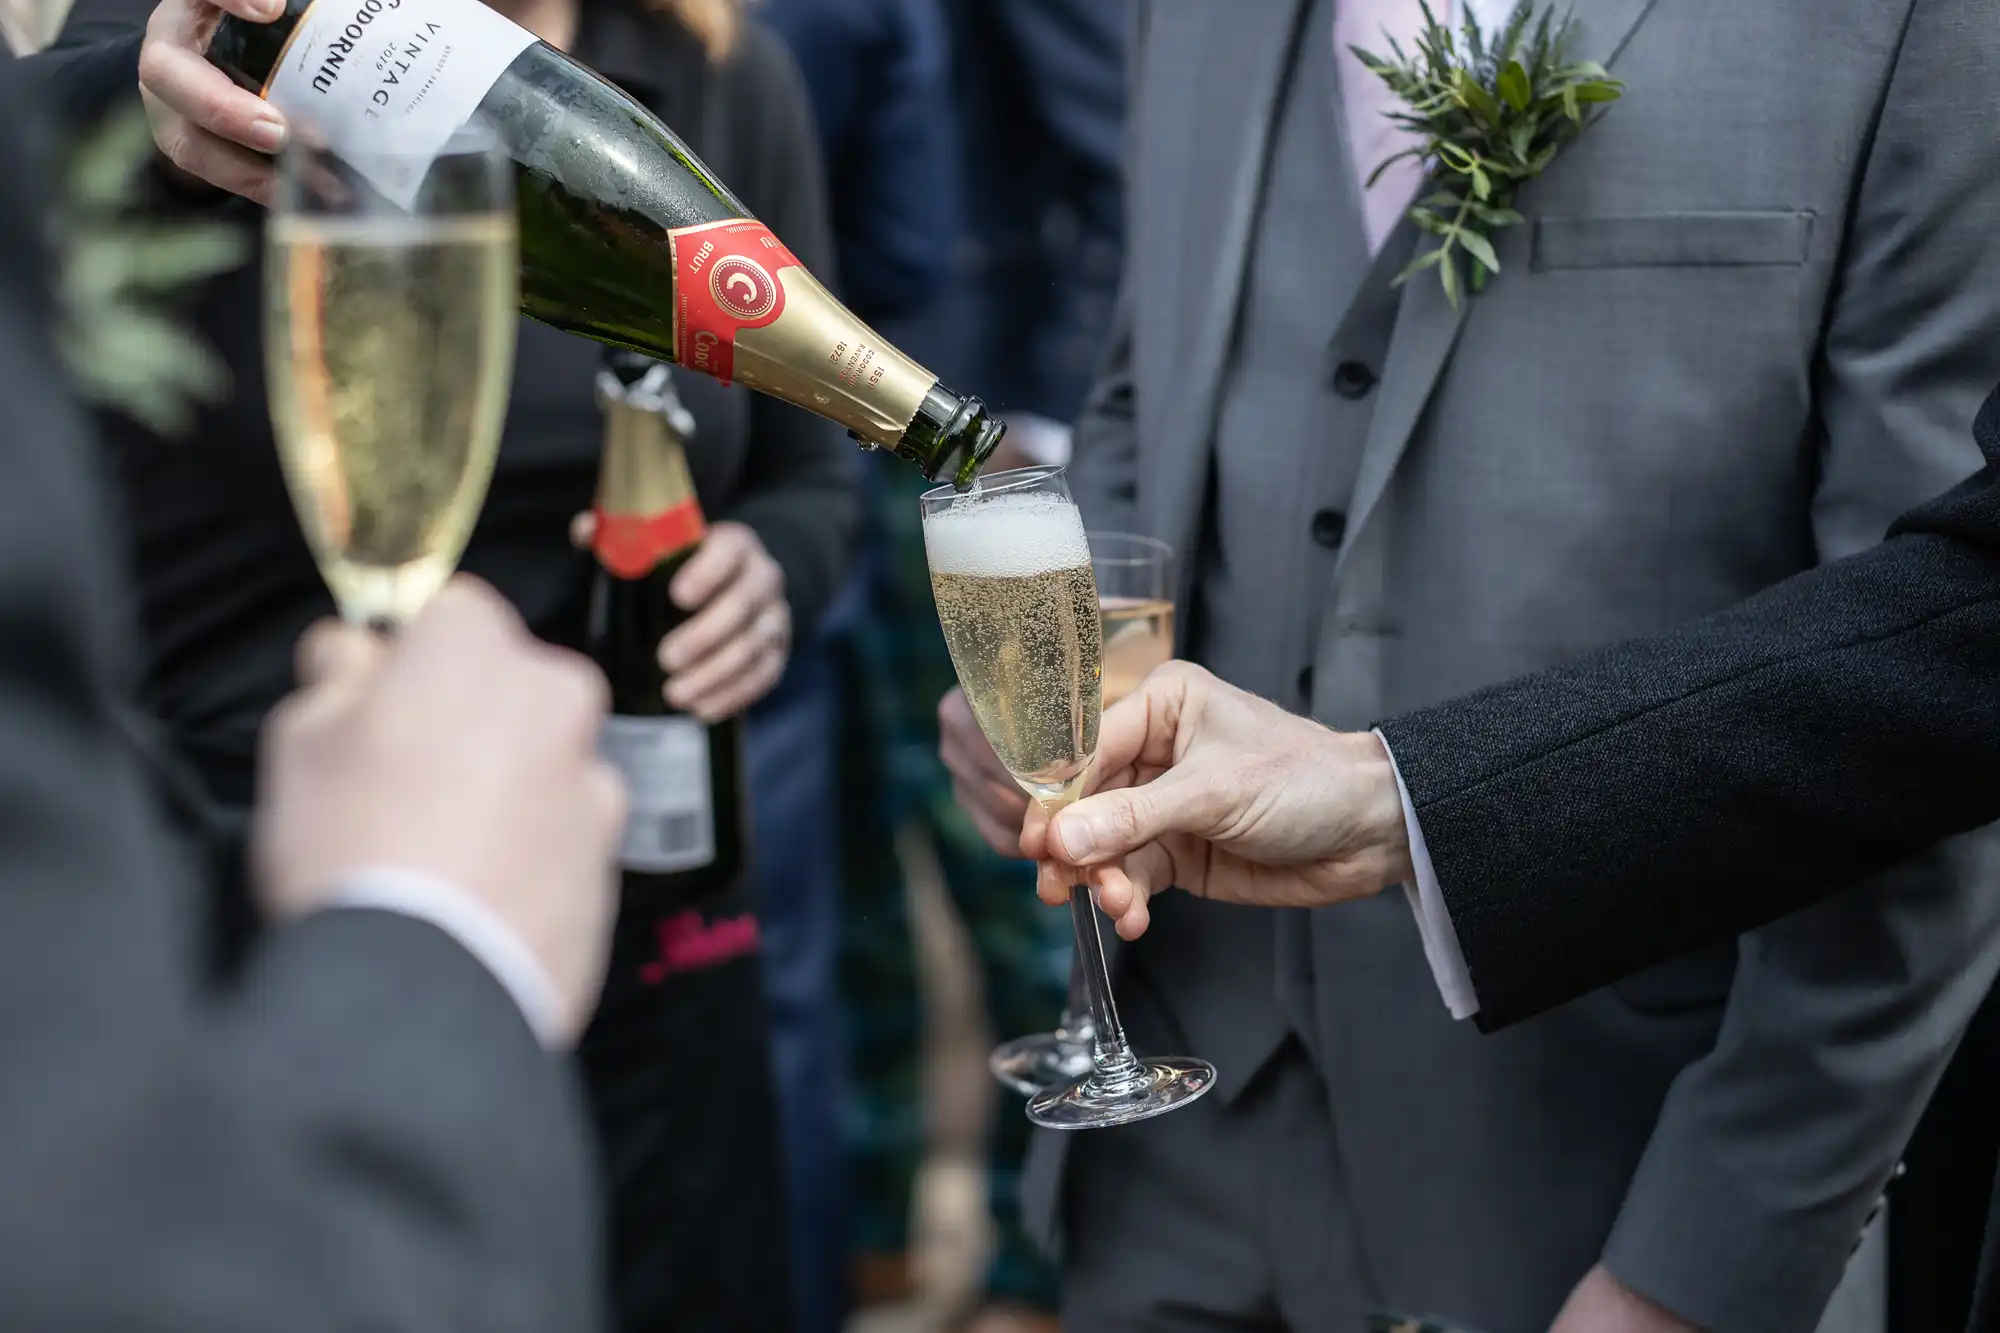 Hands holding champagne flutes as champagne is being poured, with people in formal attire in the background.